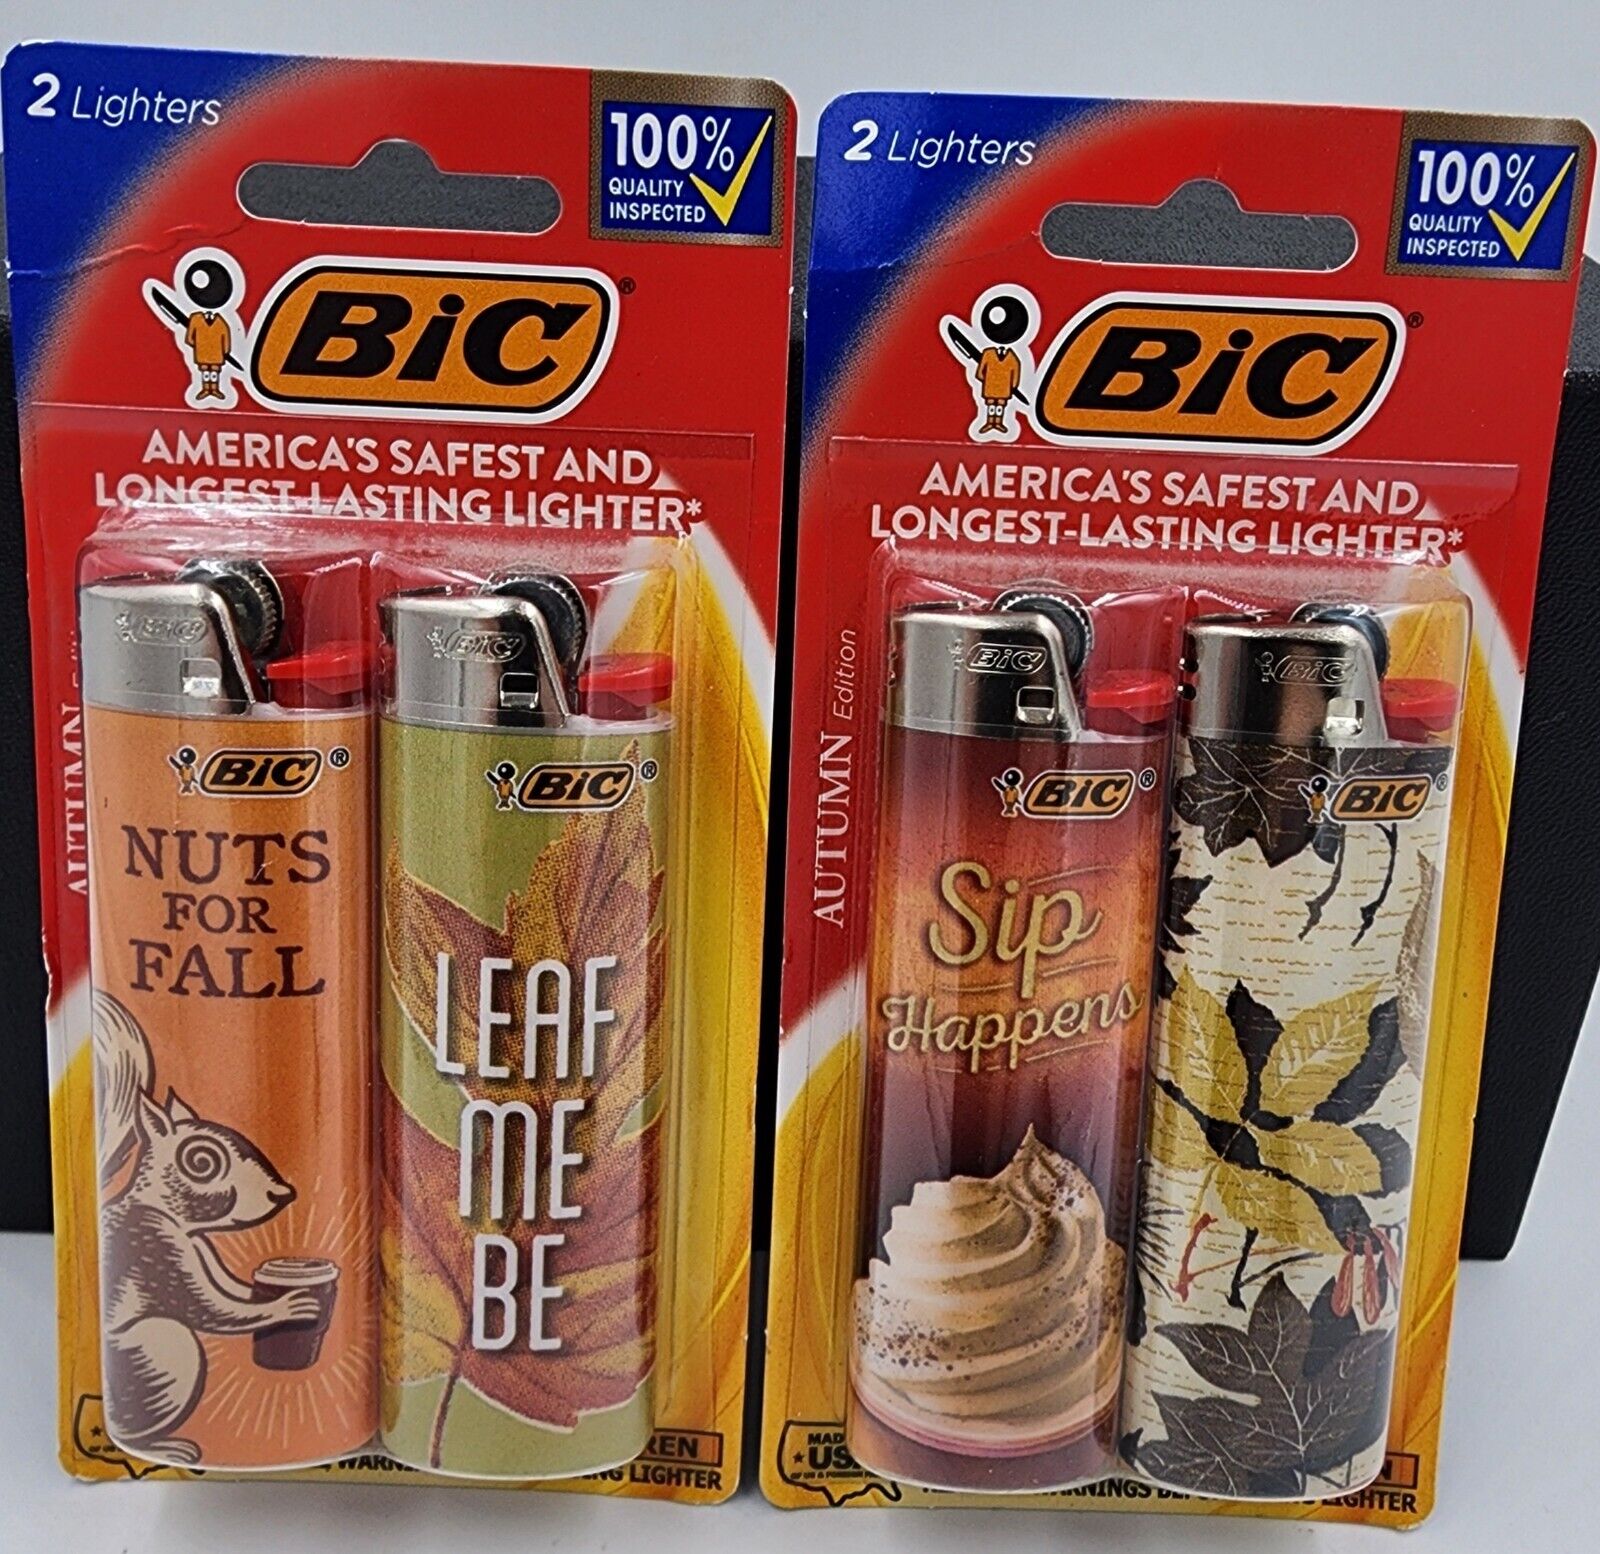 4 Bic Autumn Special Edition Lighters, Smoker Gift, Nuts for Fall, Leaf Me Be